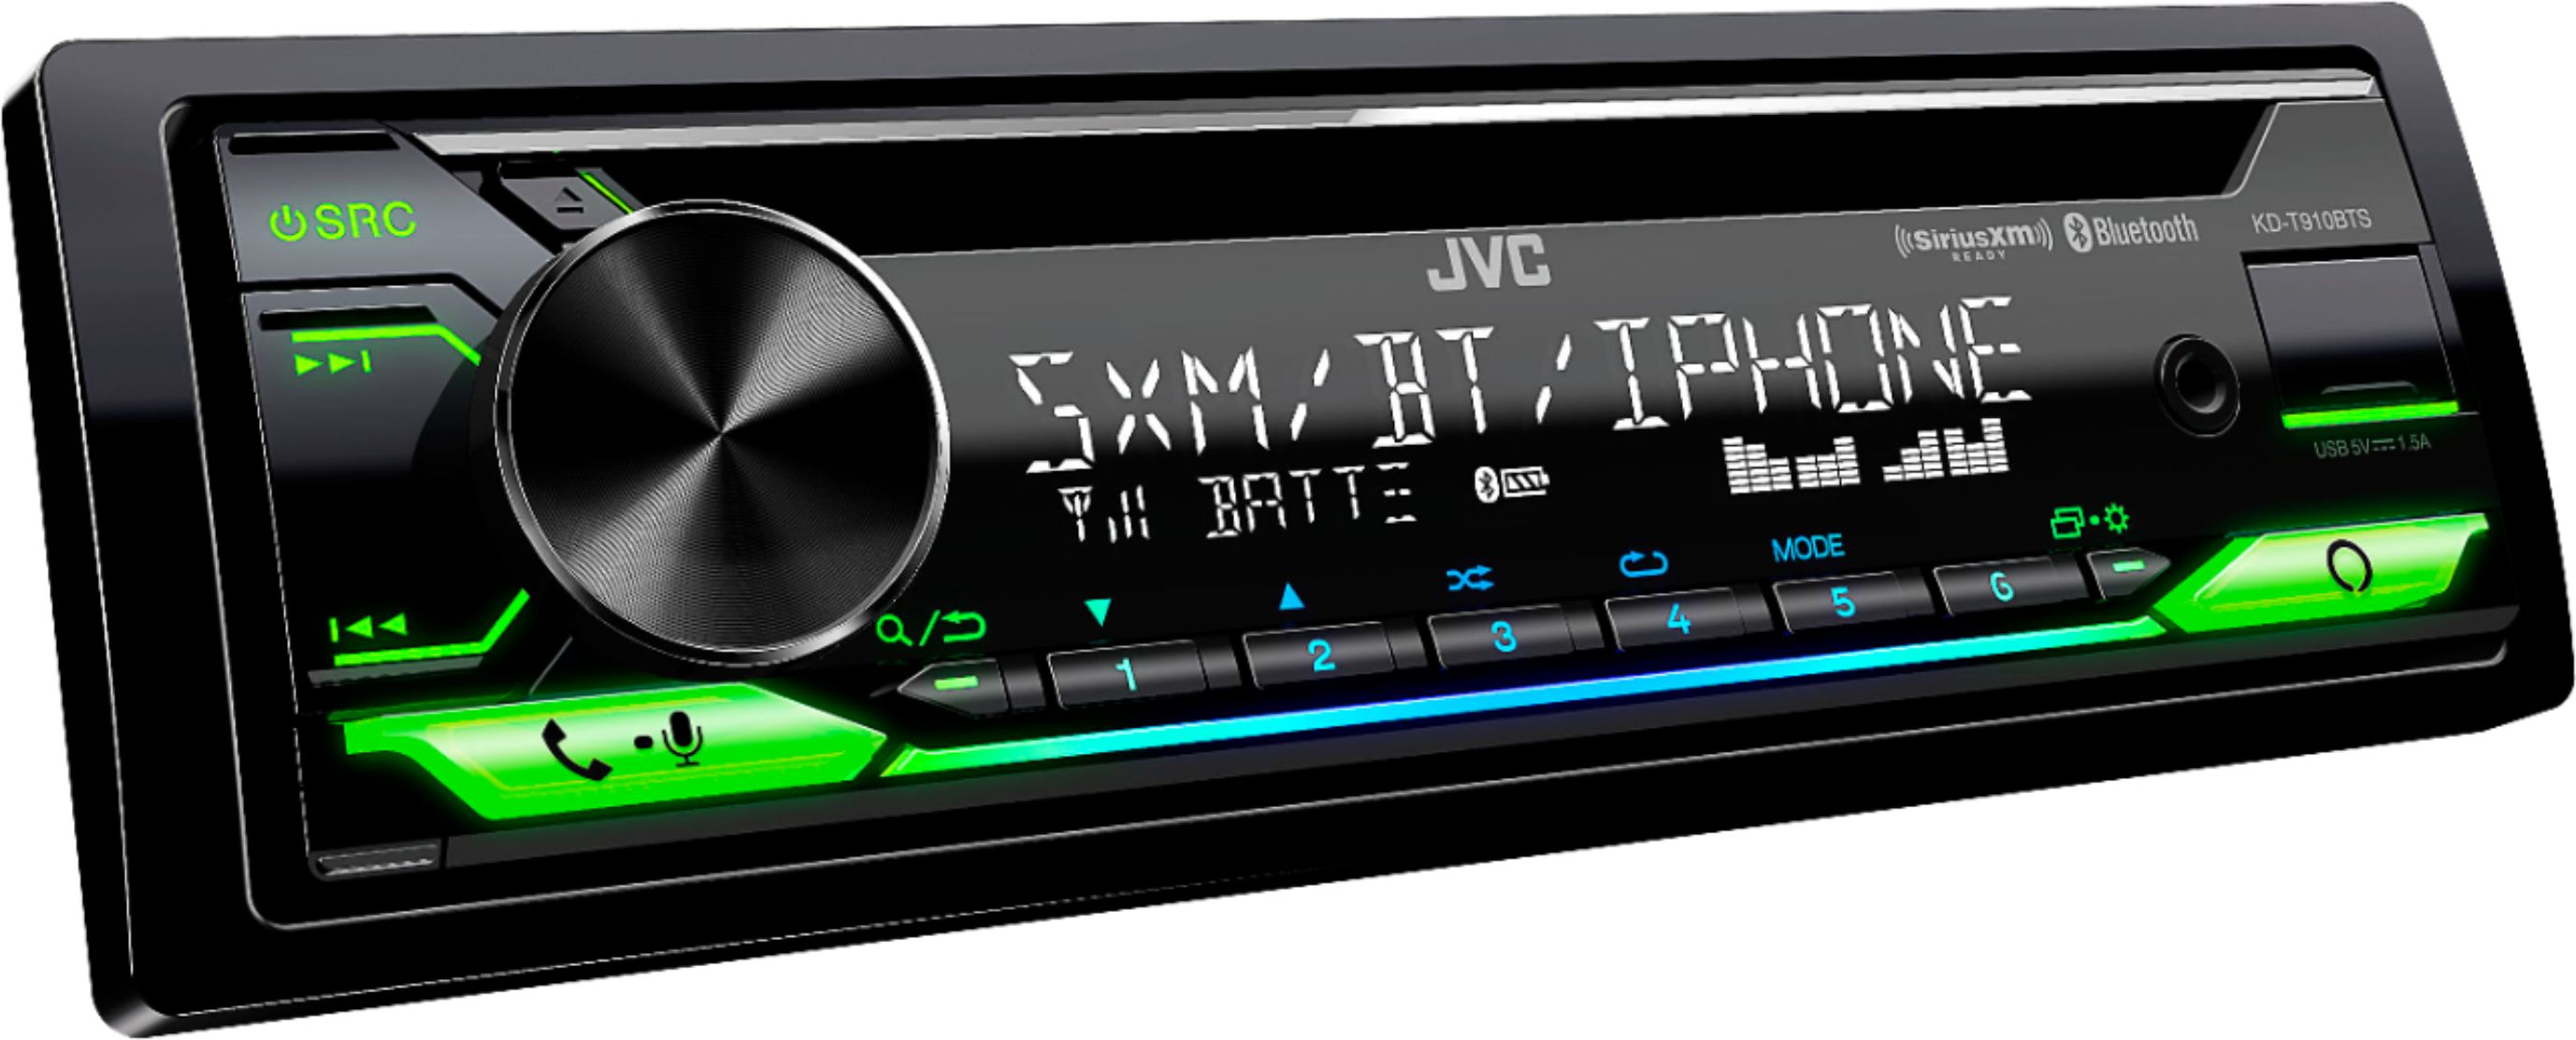 Angle View: JVC - In-Dash CD/DM Receiver - Built-in Bluetooth - Satellite Radio-ready with Detachable Faceplate - Black